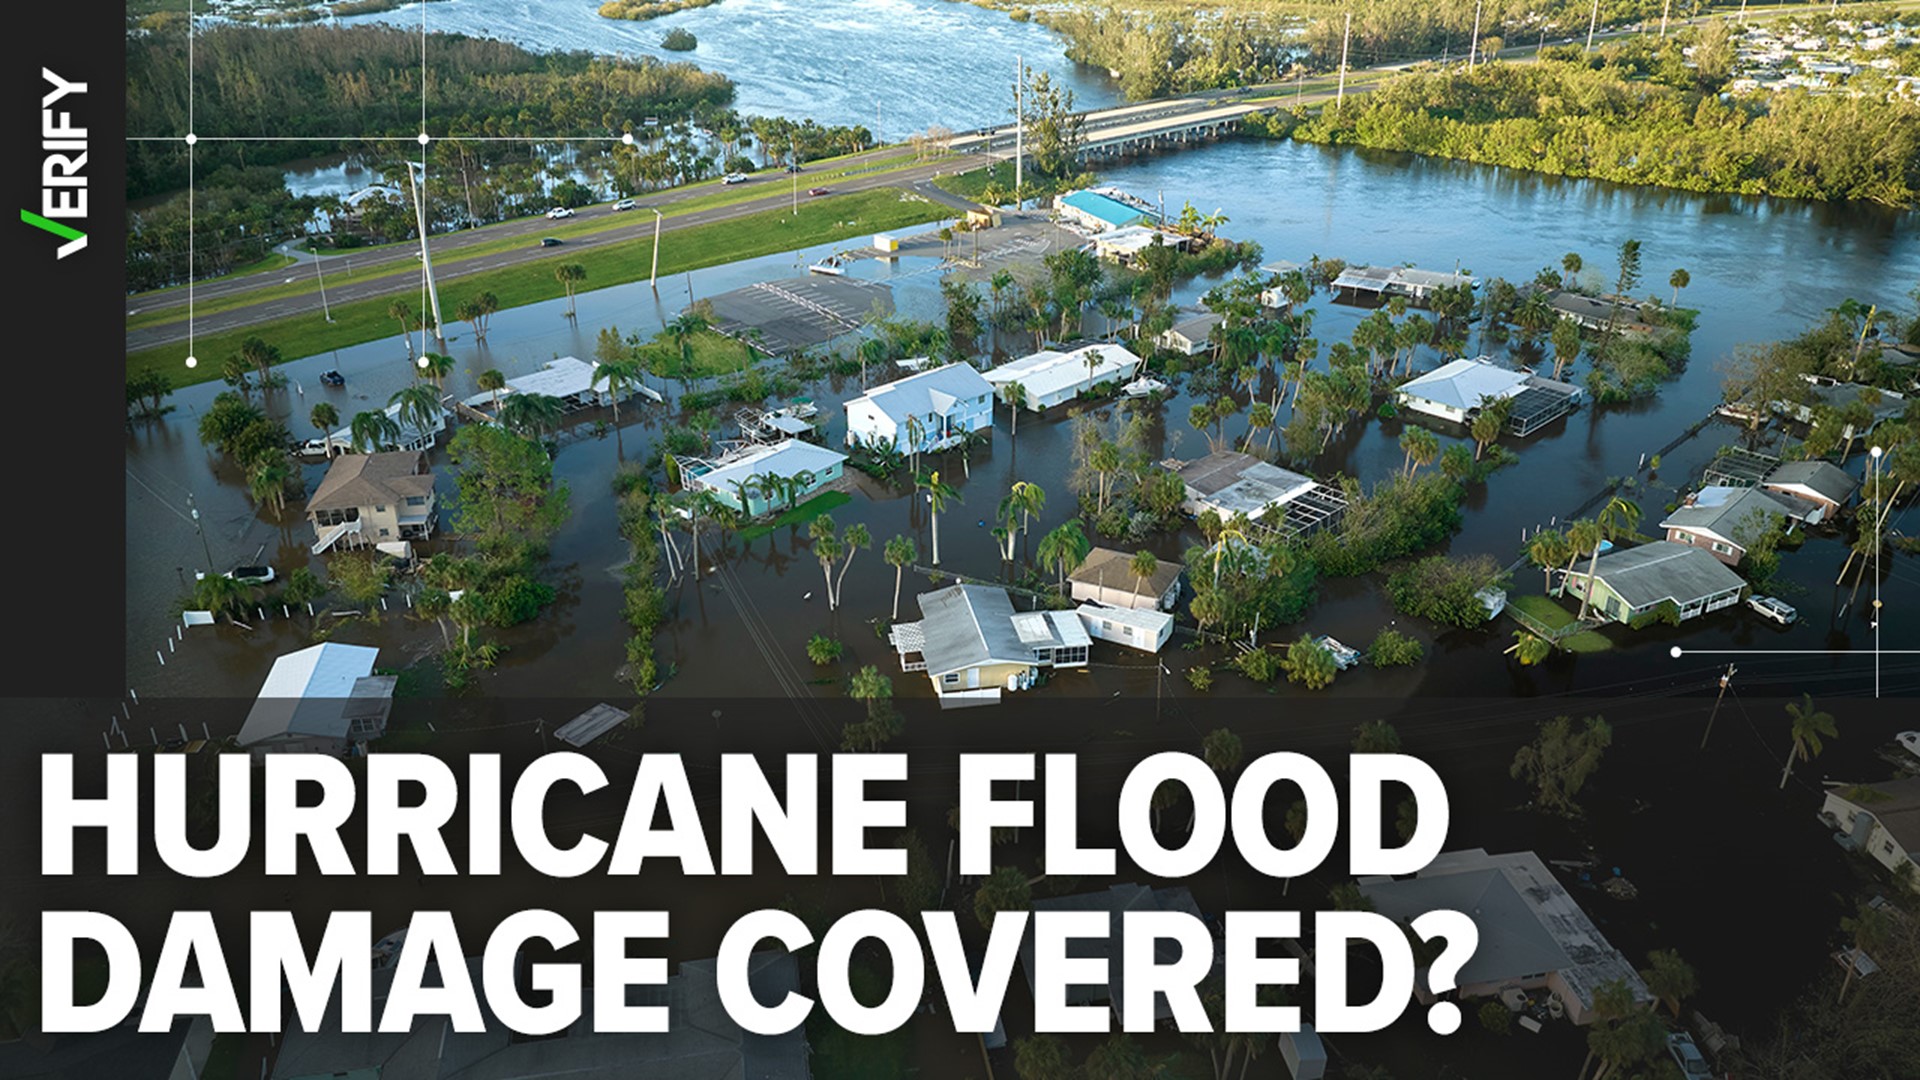 Separate flood insurance policies are available through private companies or a national program managed by FEMA.